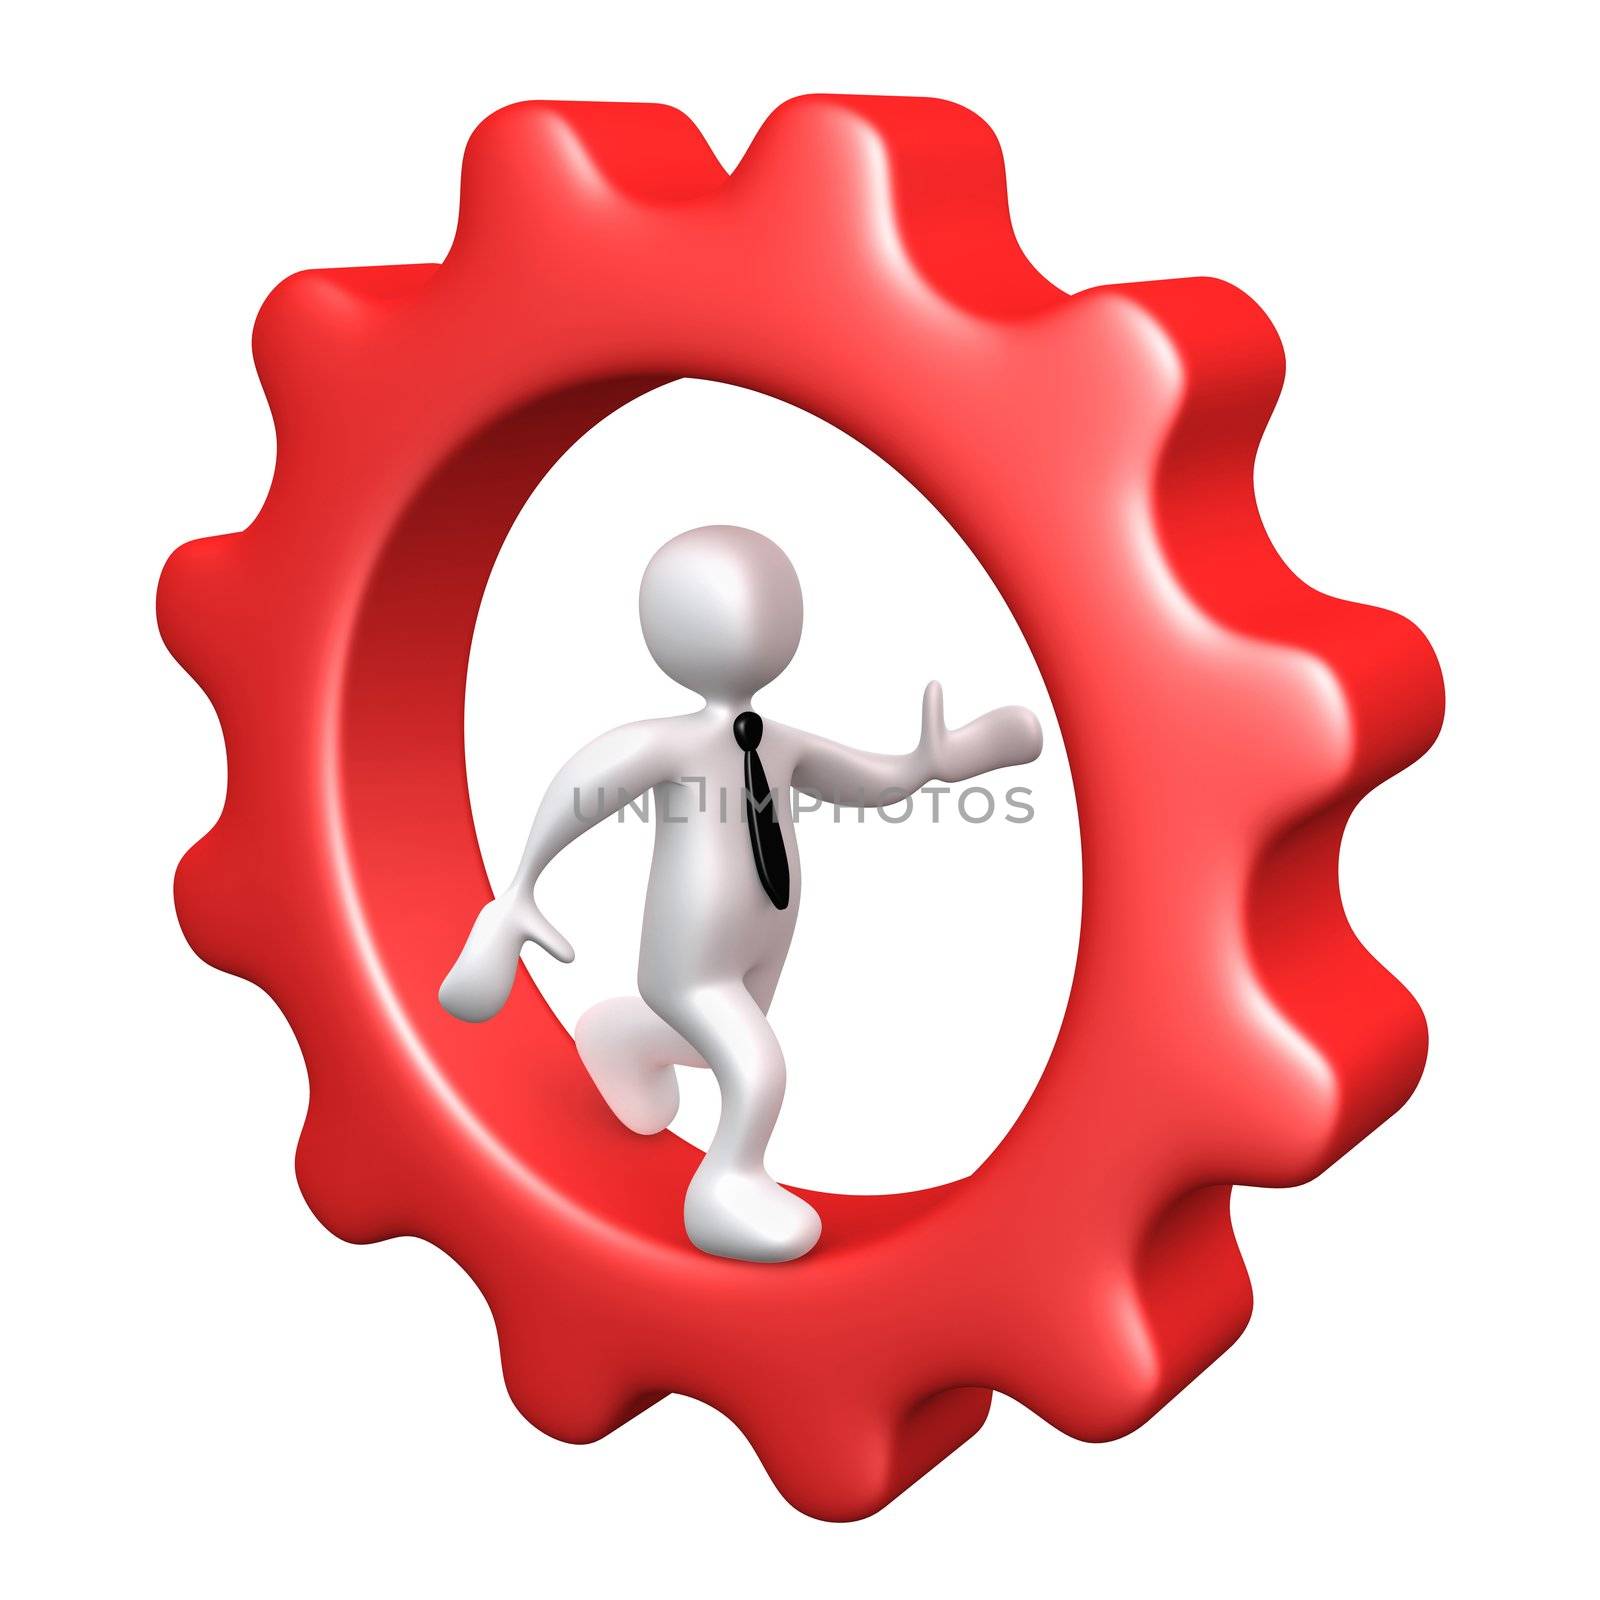 Computer Generated Image - Businessman Running Inside A Cog.